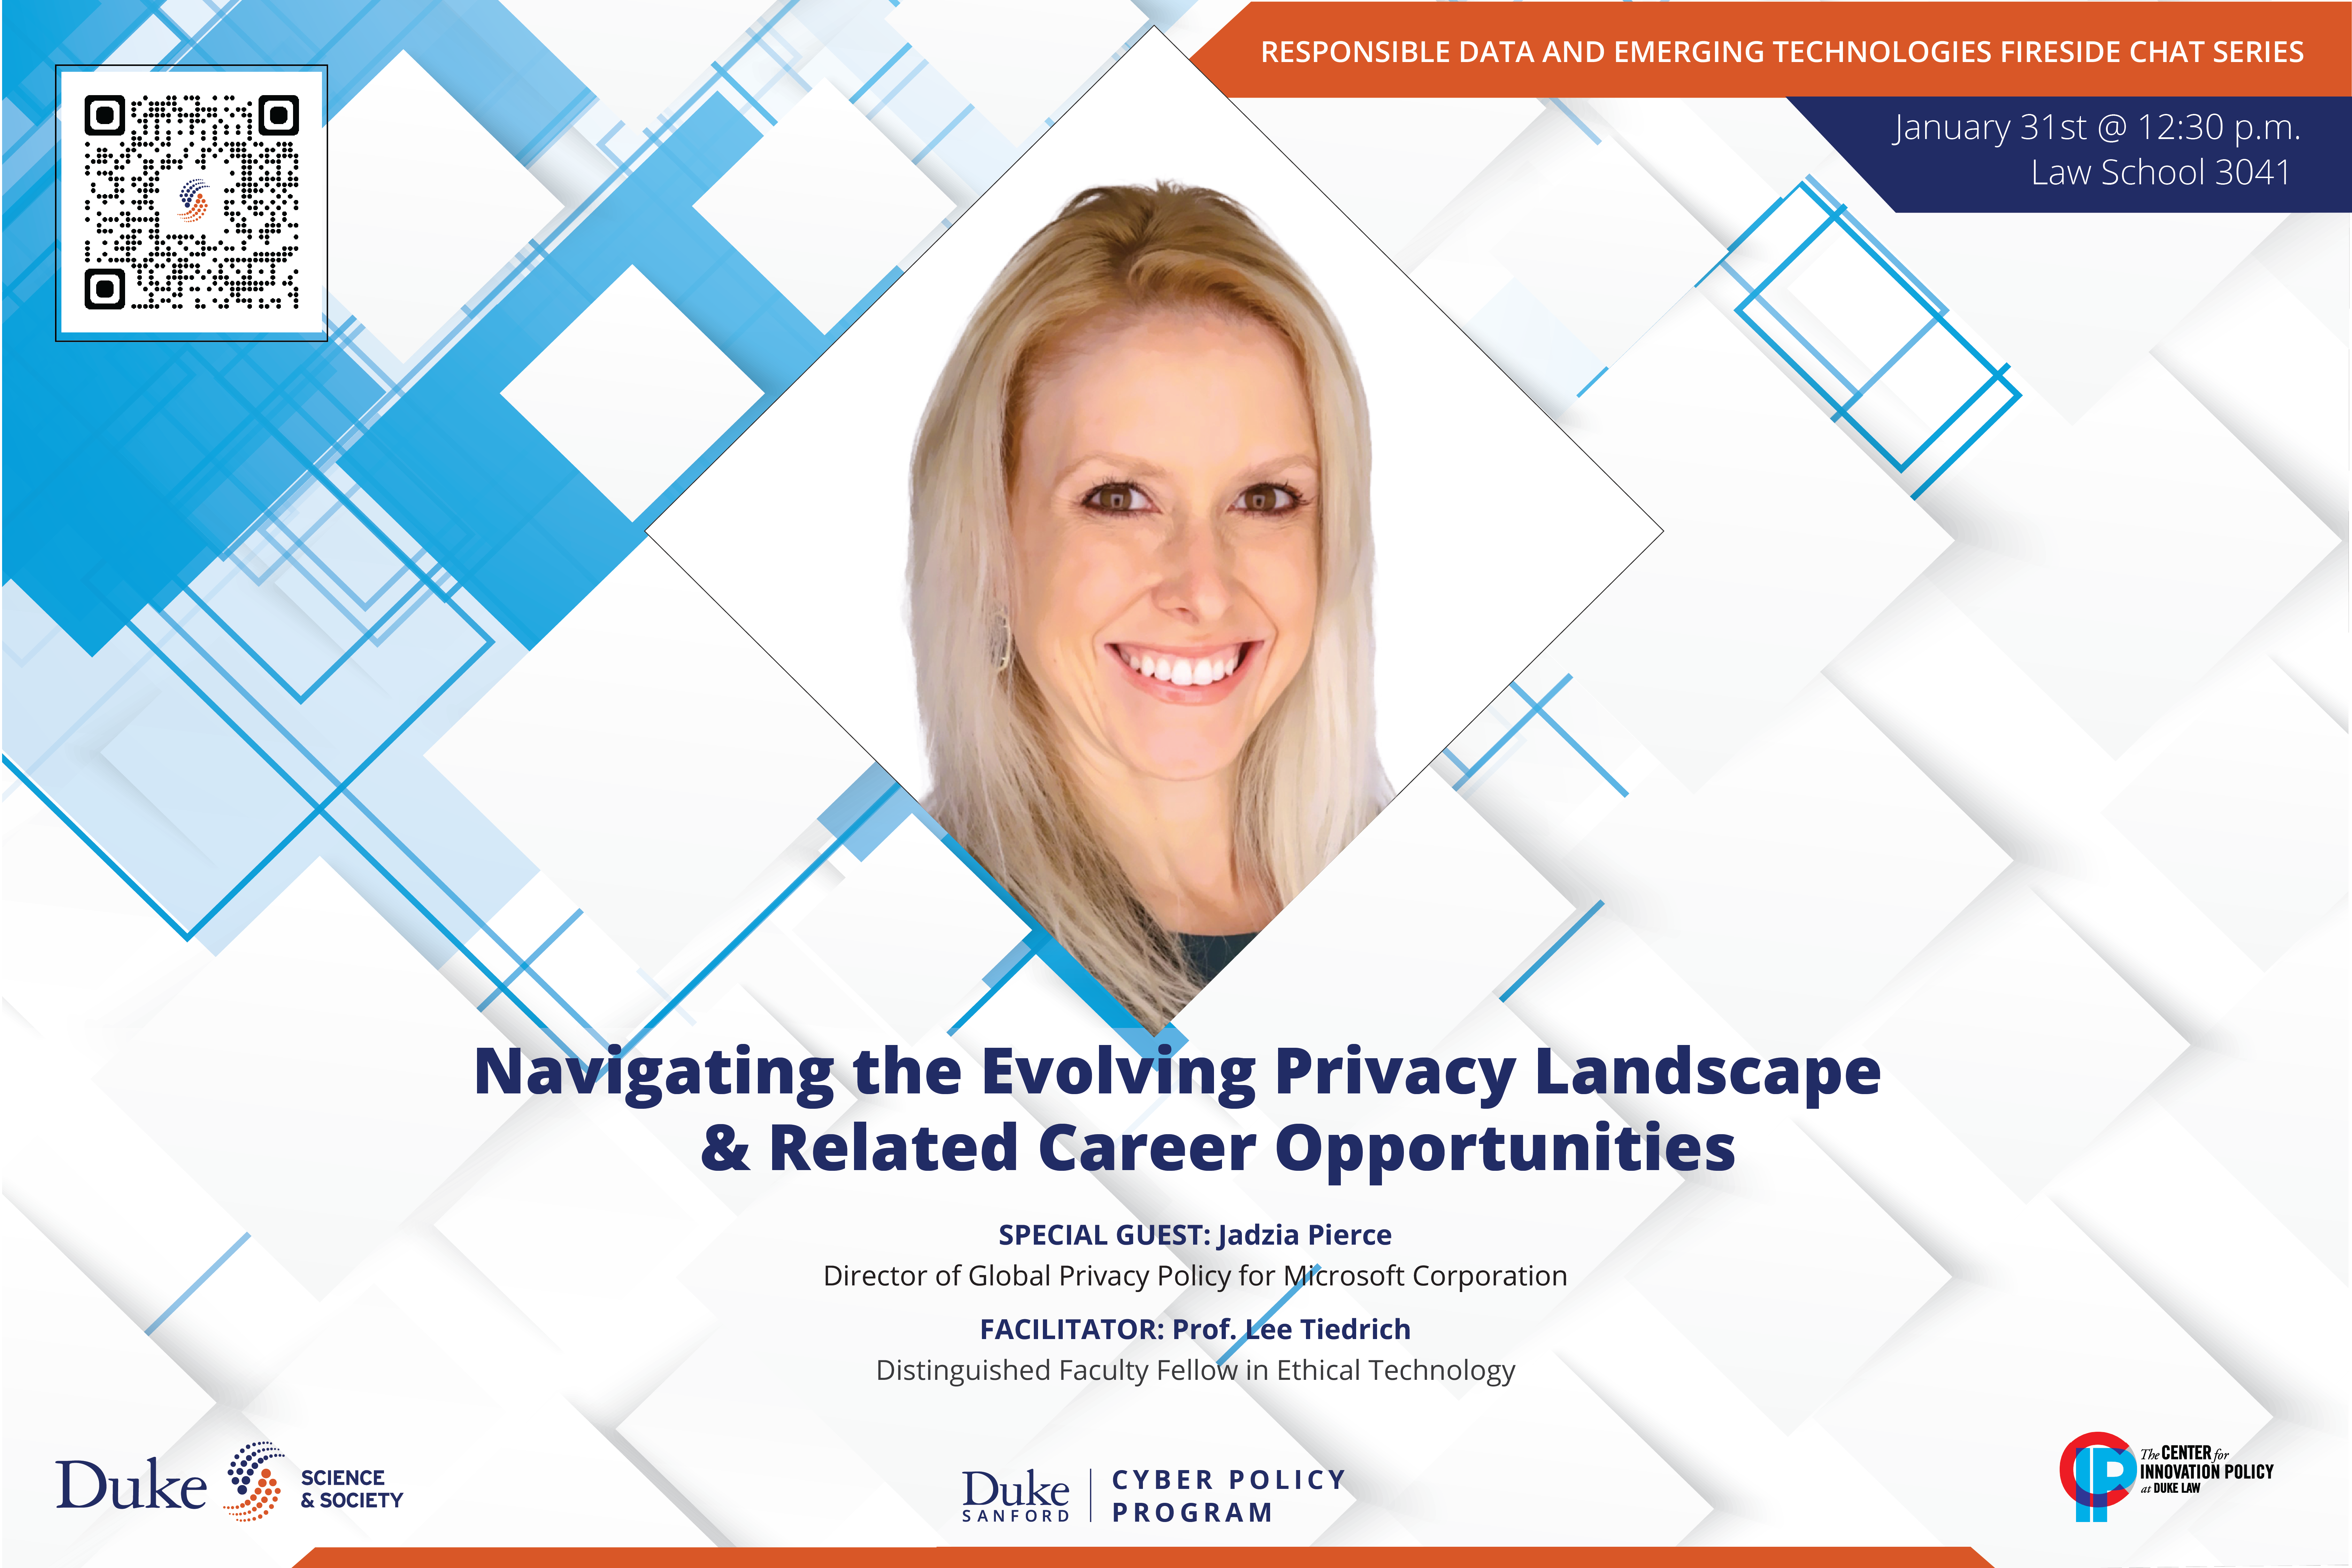 Come chat with Director of Global Privacy Policy for Microsoft Corporation, Jadzia Pierce